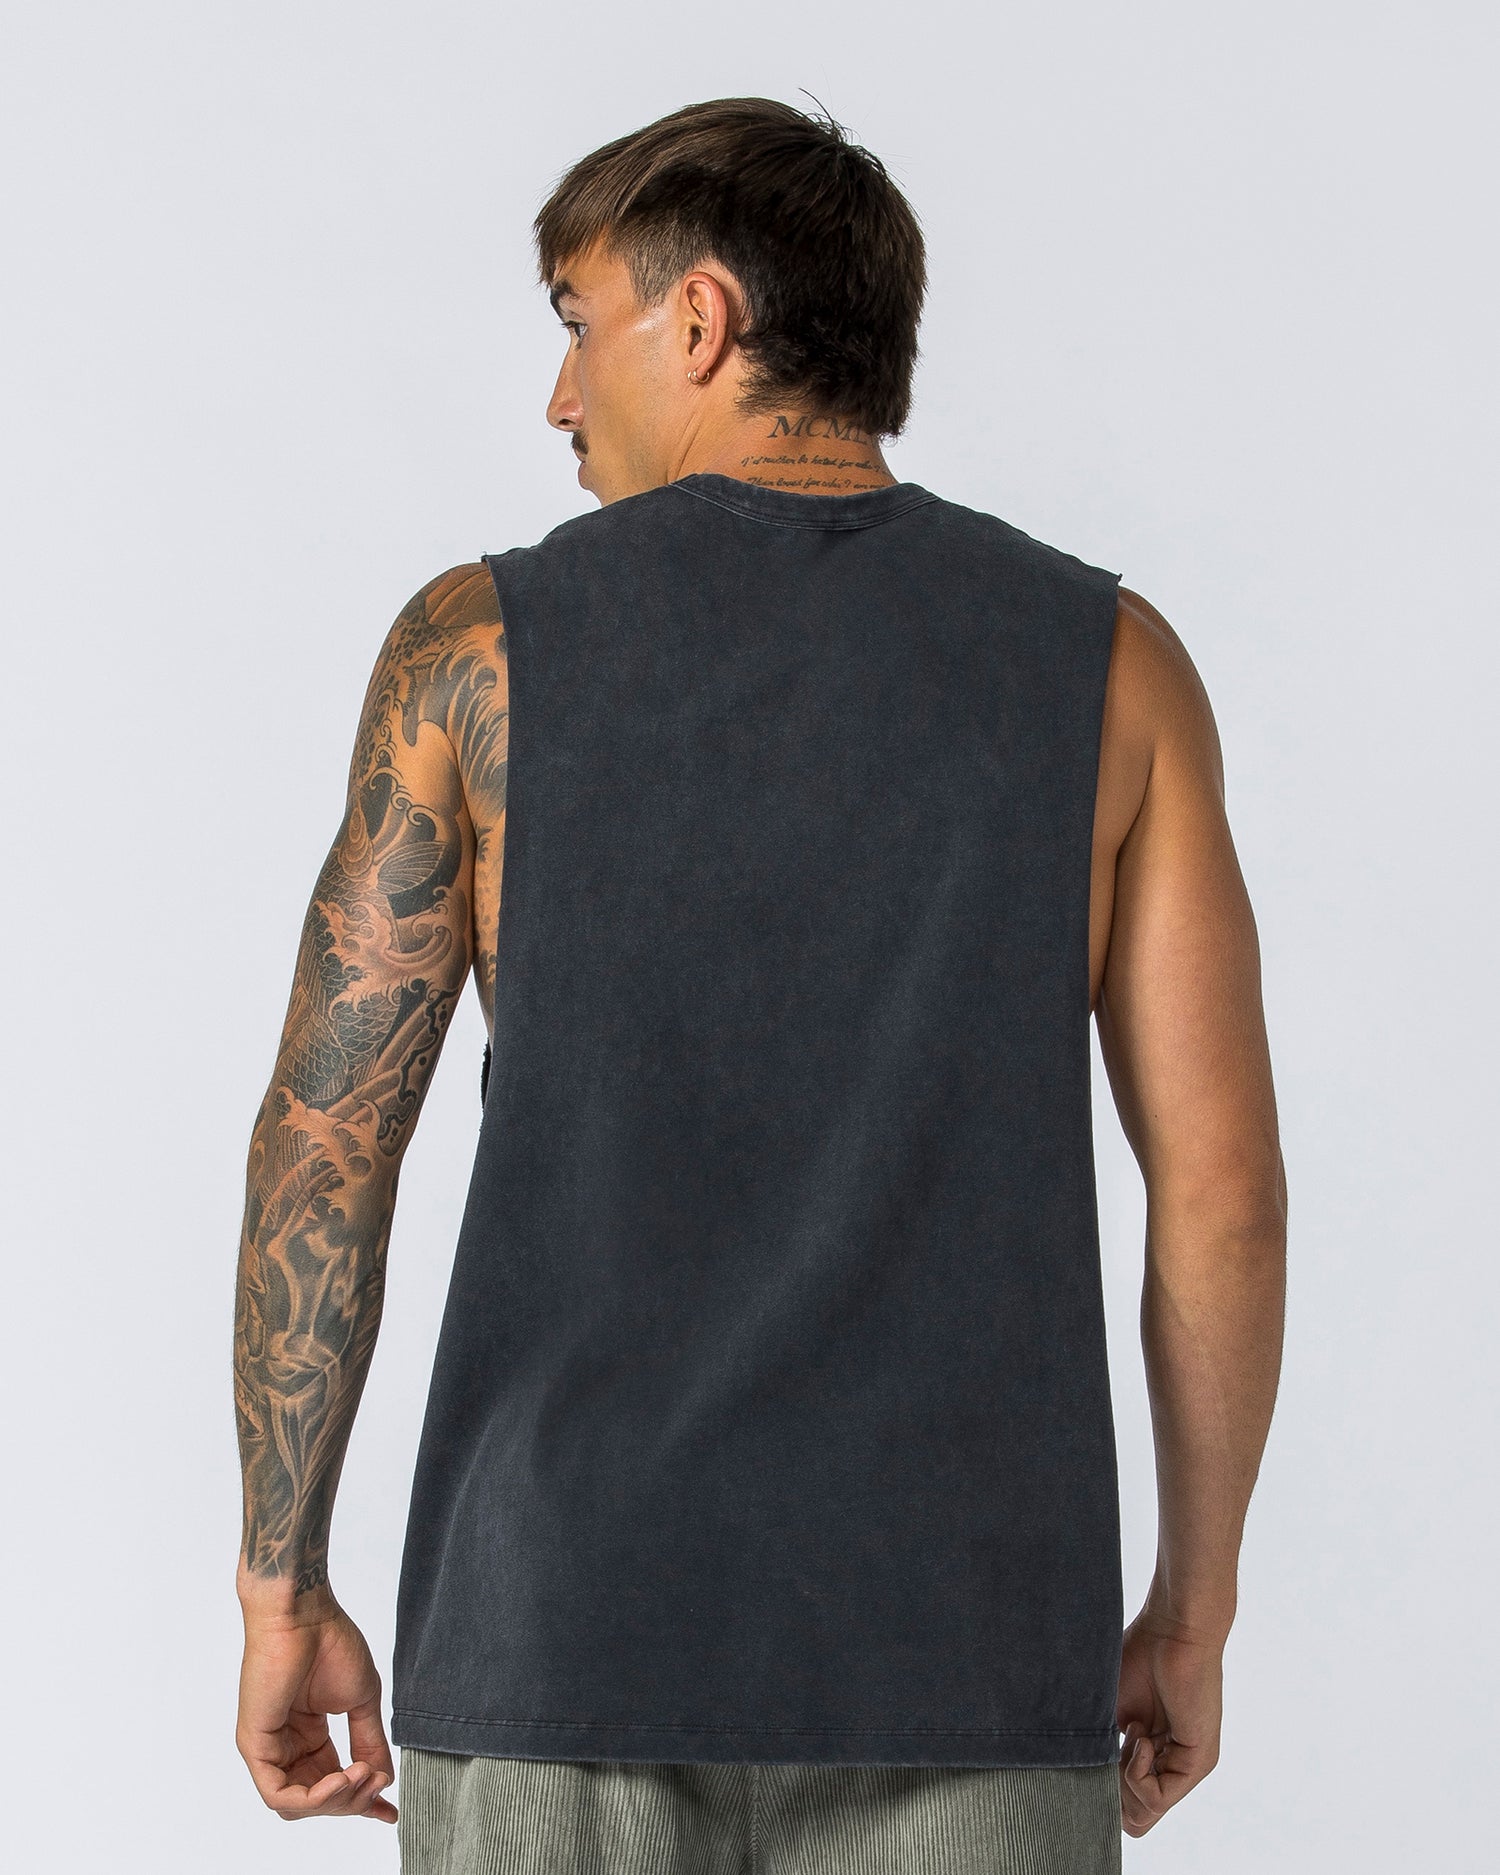 Ease Drop Arm Heavy Vintage Tank - Washed Black - Muscle Nation